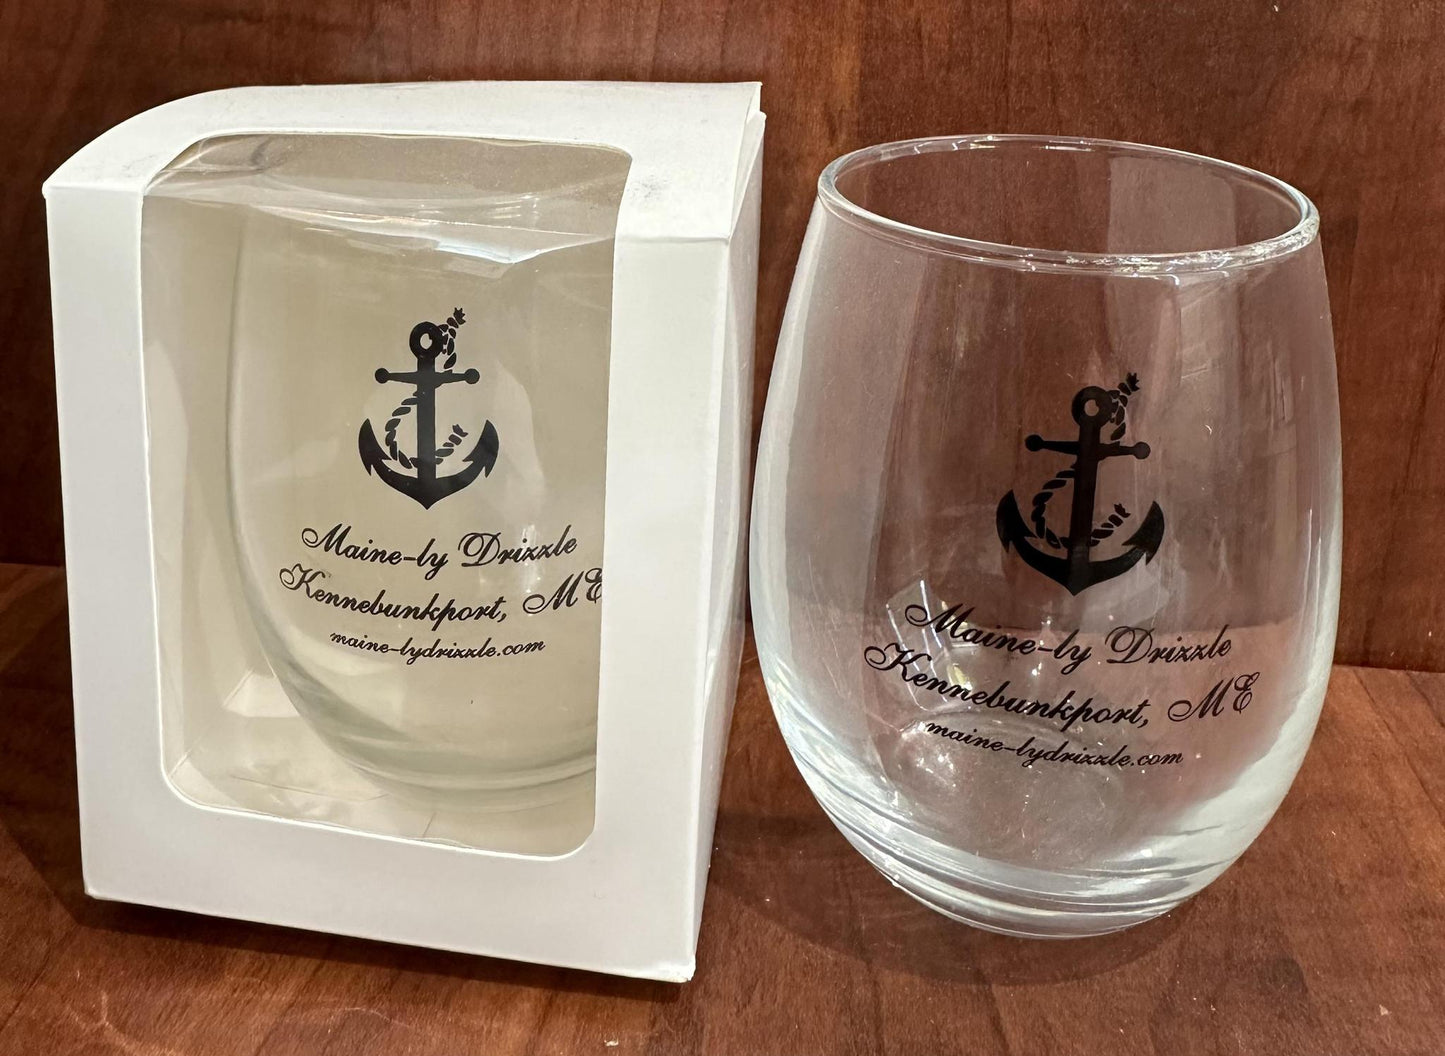 Maine-Ly Drizzle Stemless Wine Glass (Kennebunkport, ME.)